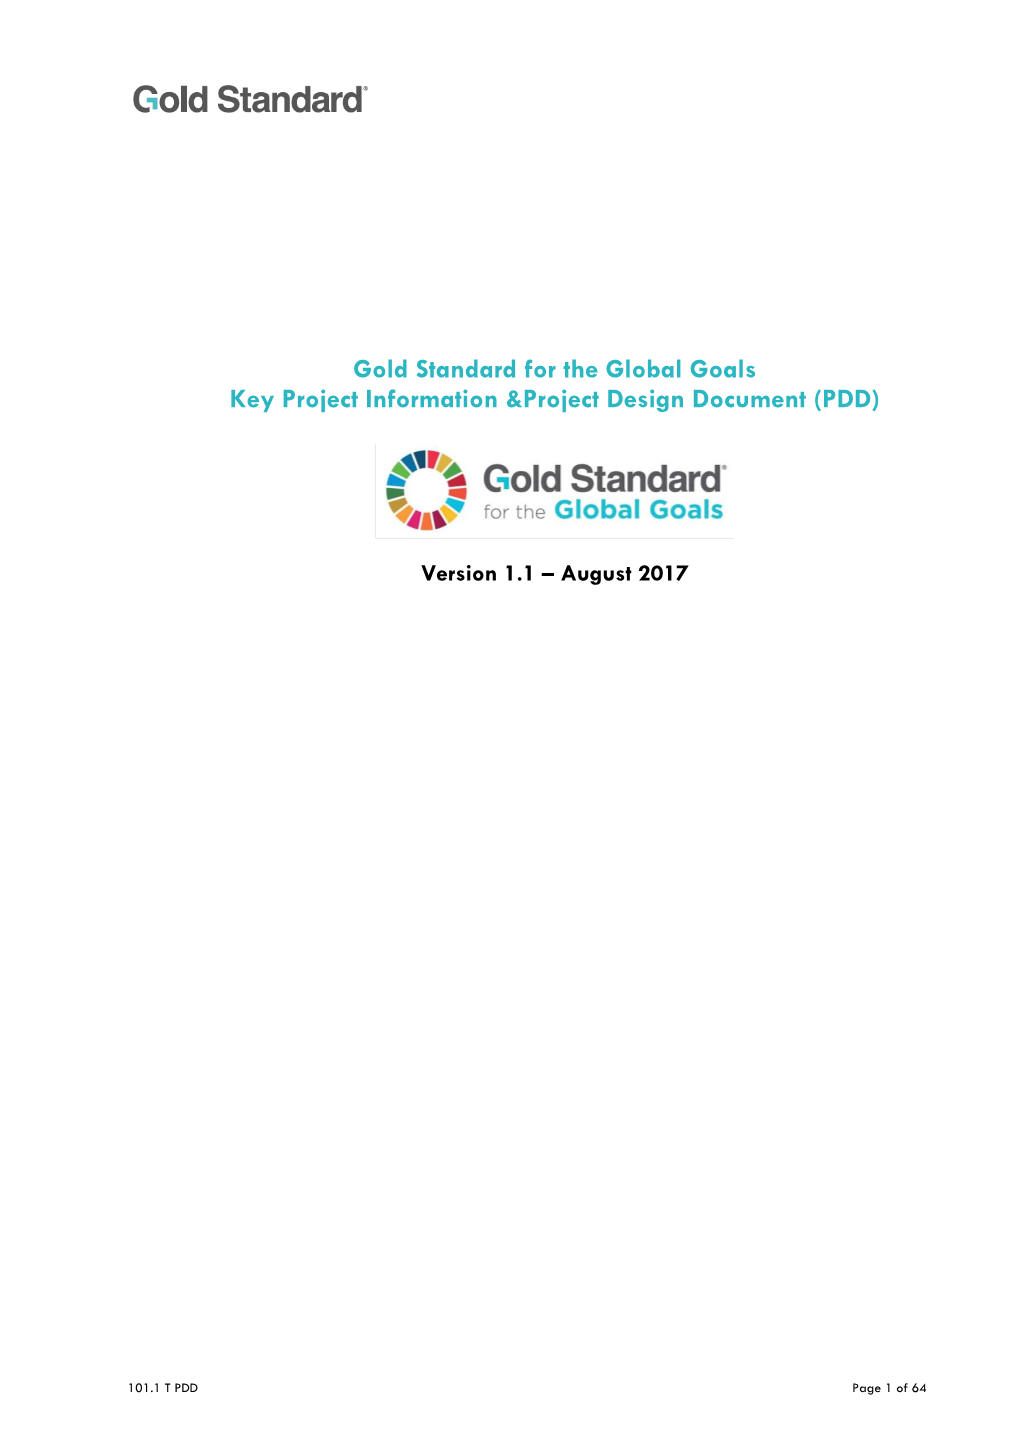 Gold Standard for the Global Goals Key Project Information &Project